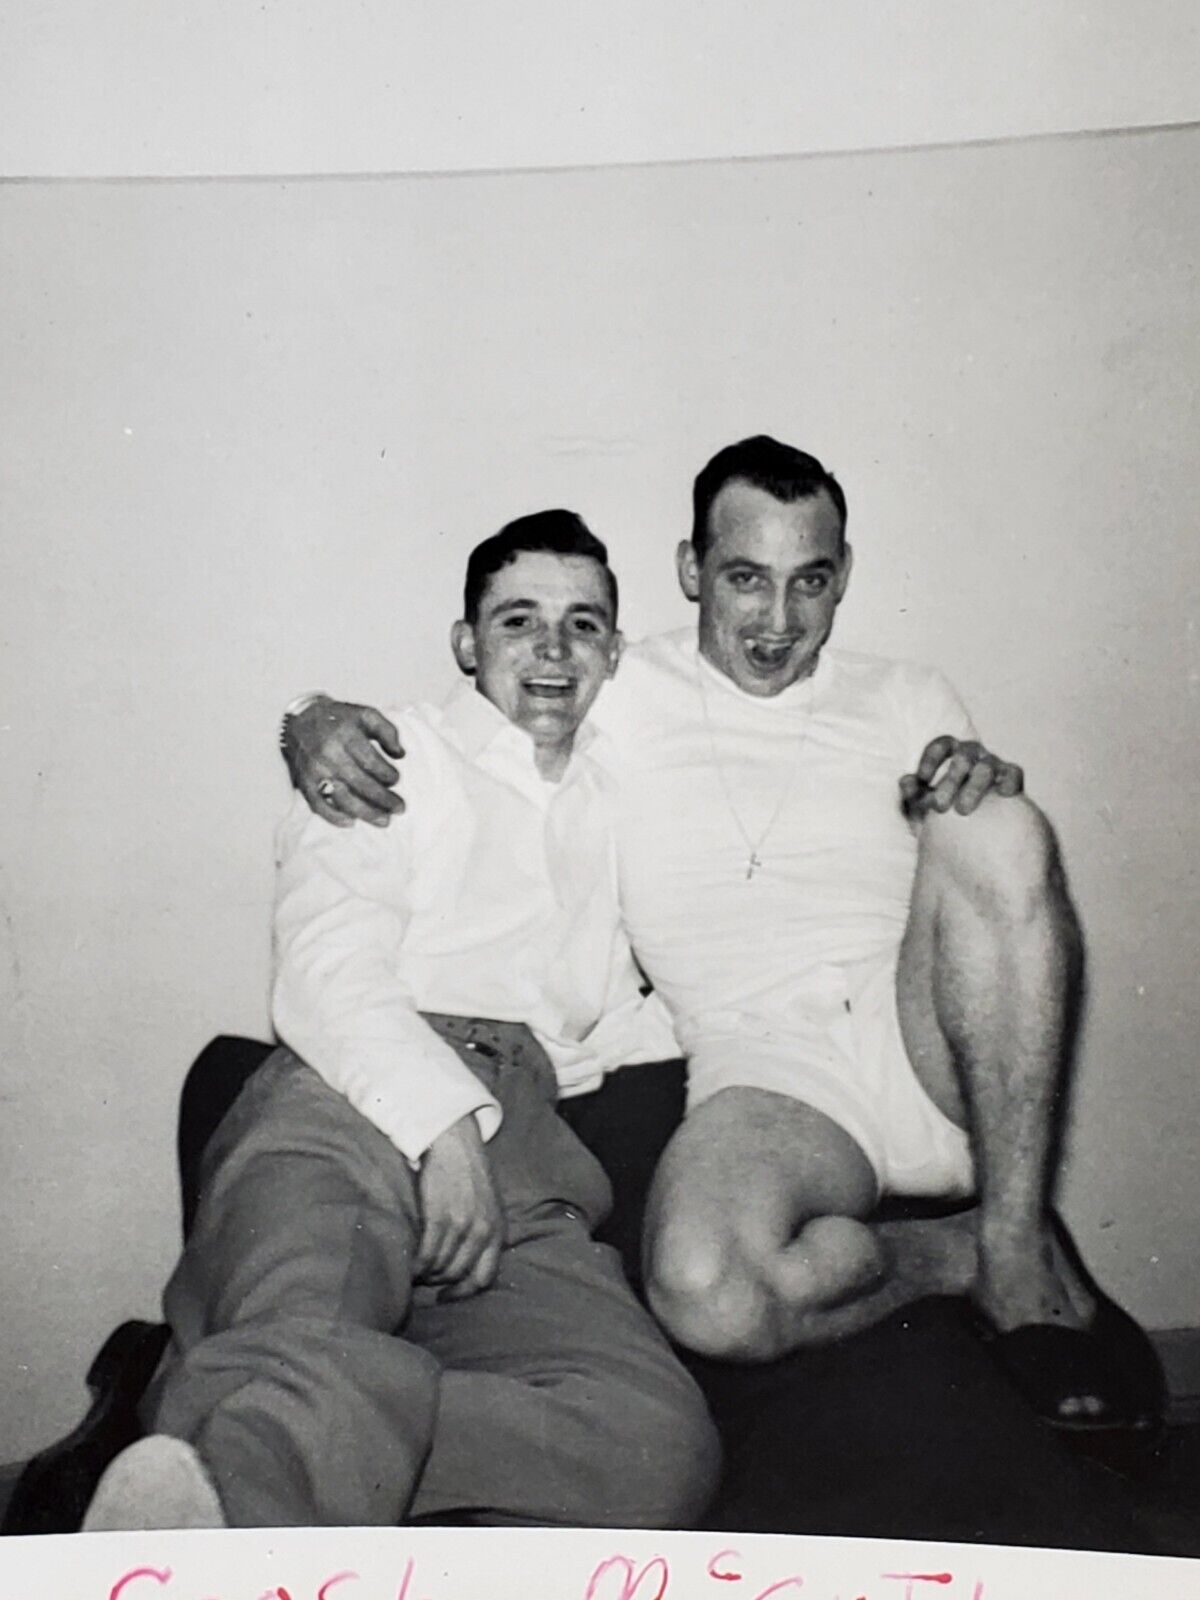 AFFECTIONATE EMBRACE ID\'D SOLDIERS 1950s photo GAY INT Lounging